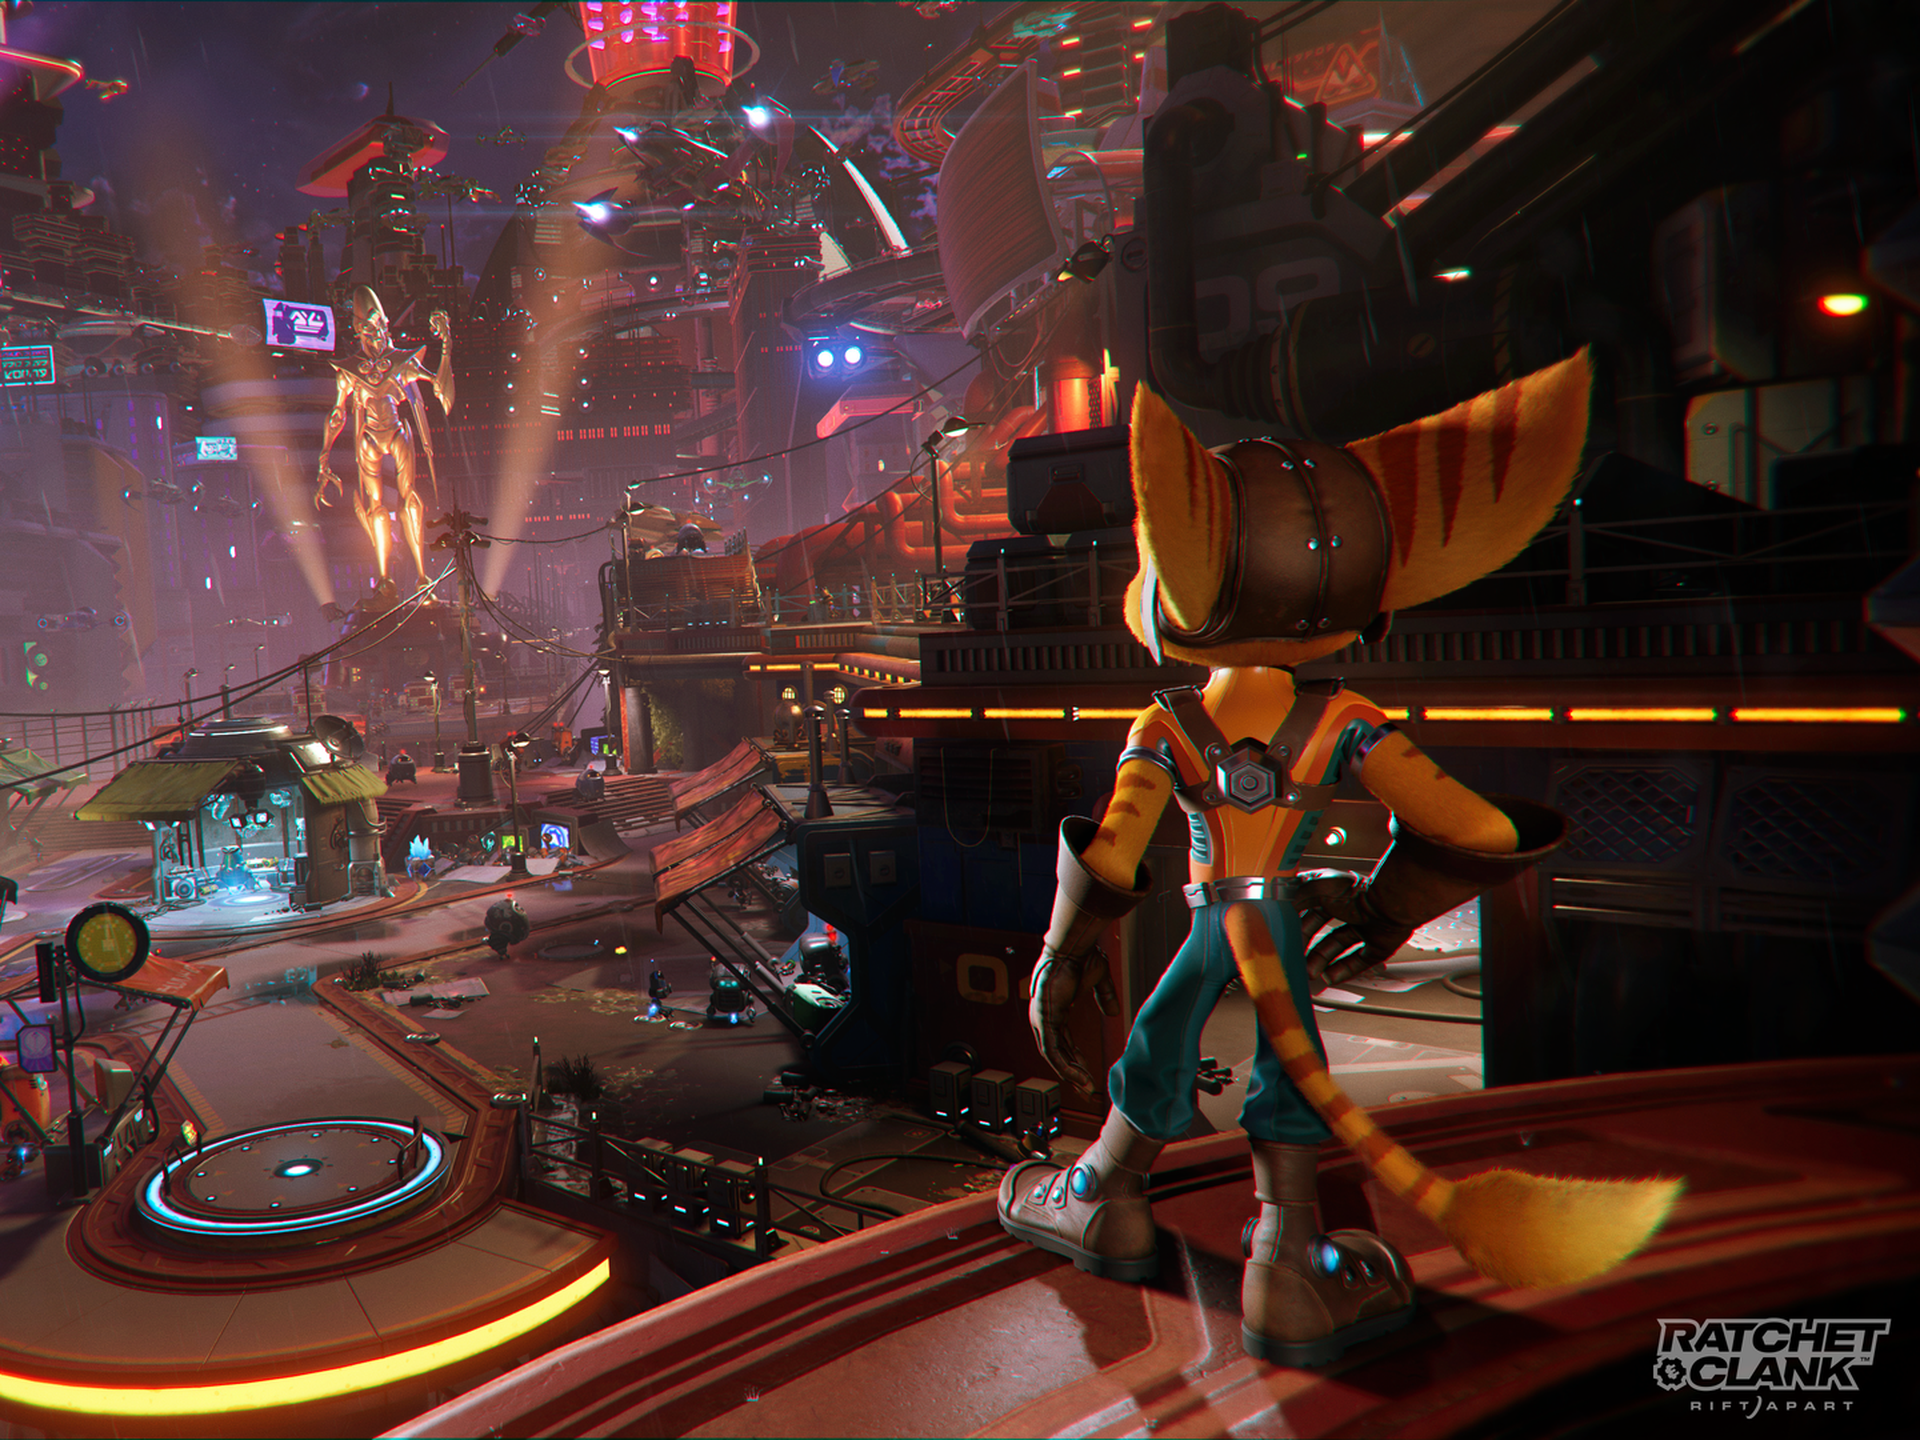 PlayStation reveals PC requirements for Ratchet & Clank: Rift